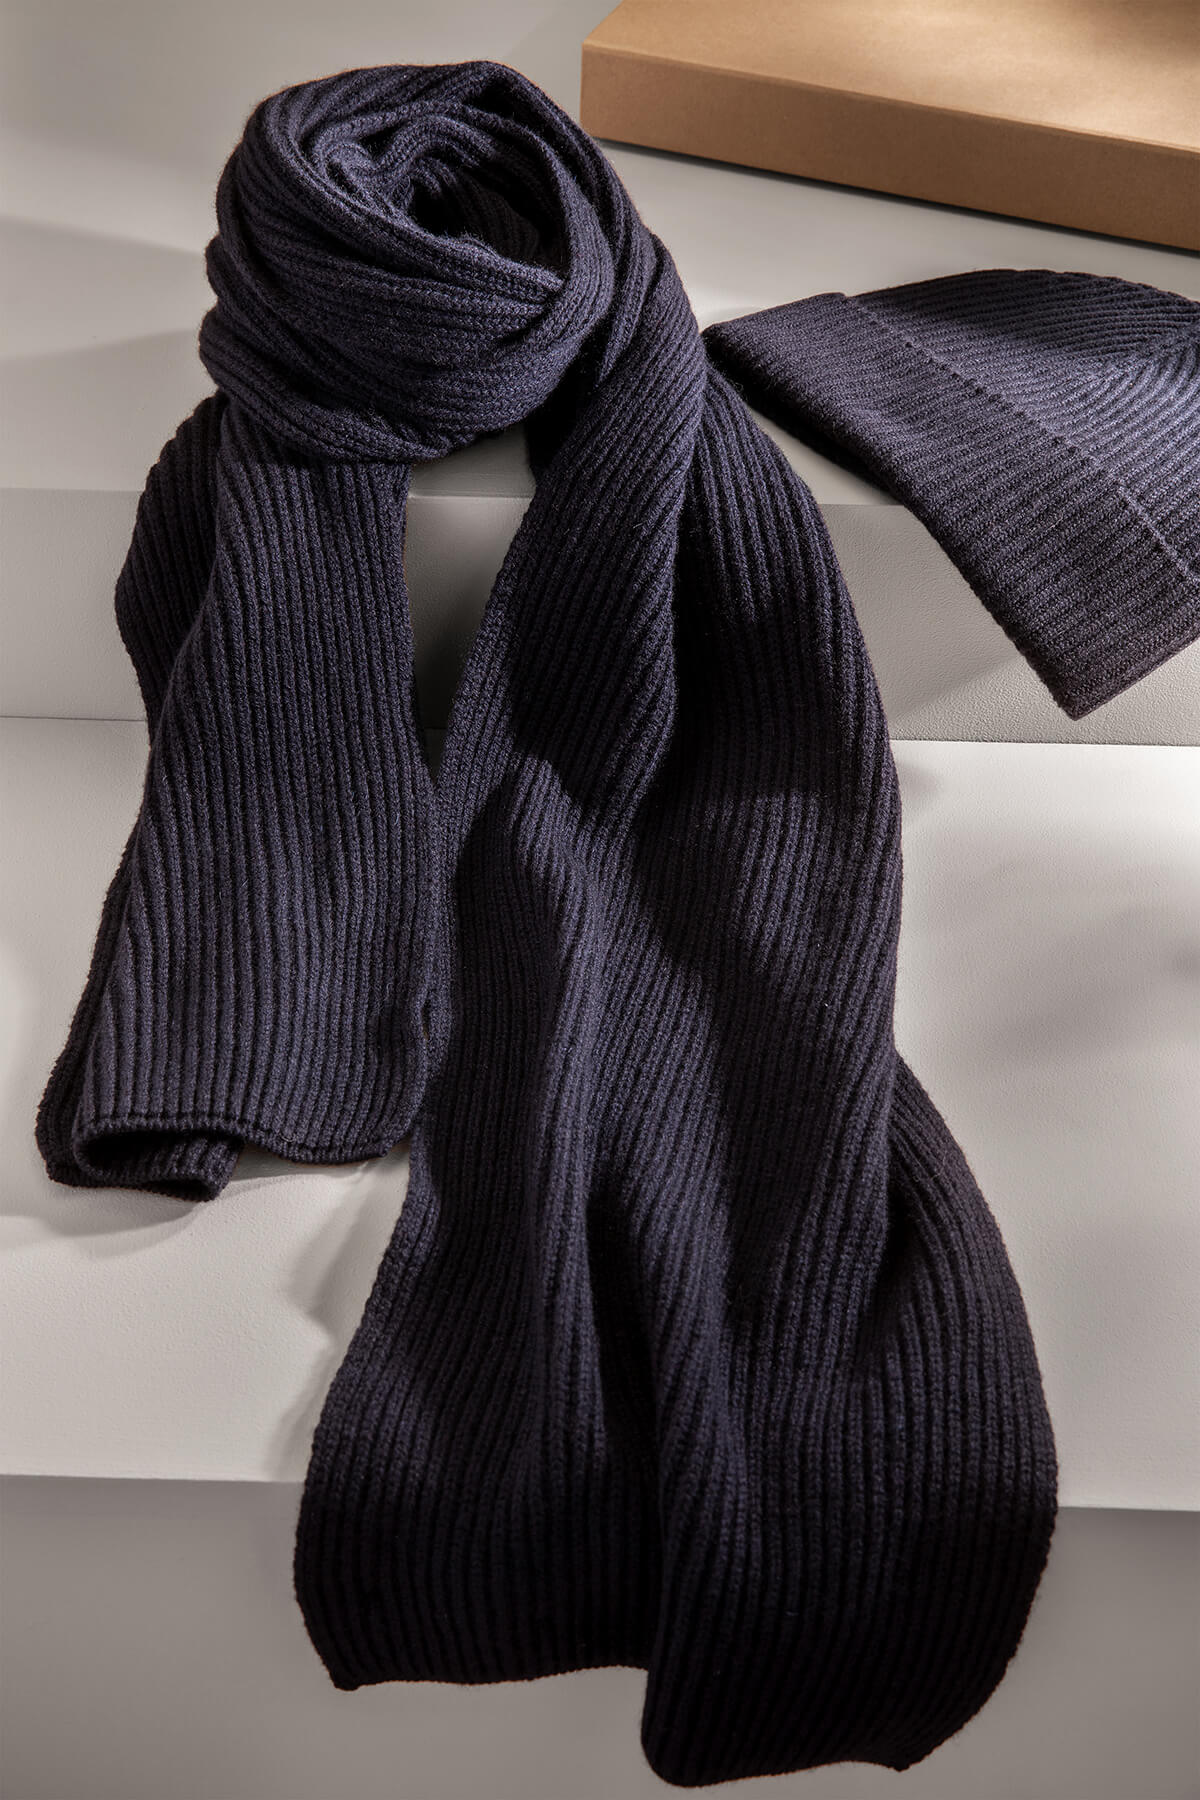 Johnstons of Elgin’s Ribbed Cashmere Beanie and Scarf Giftset in Navy on a grey background AW23GIFTSET6B